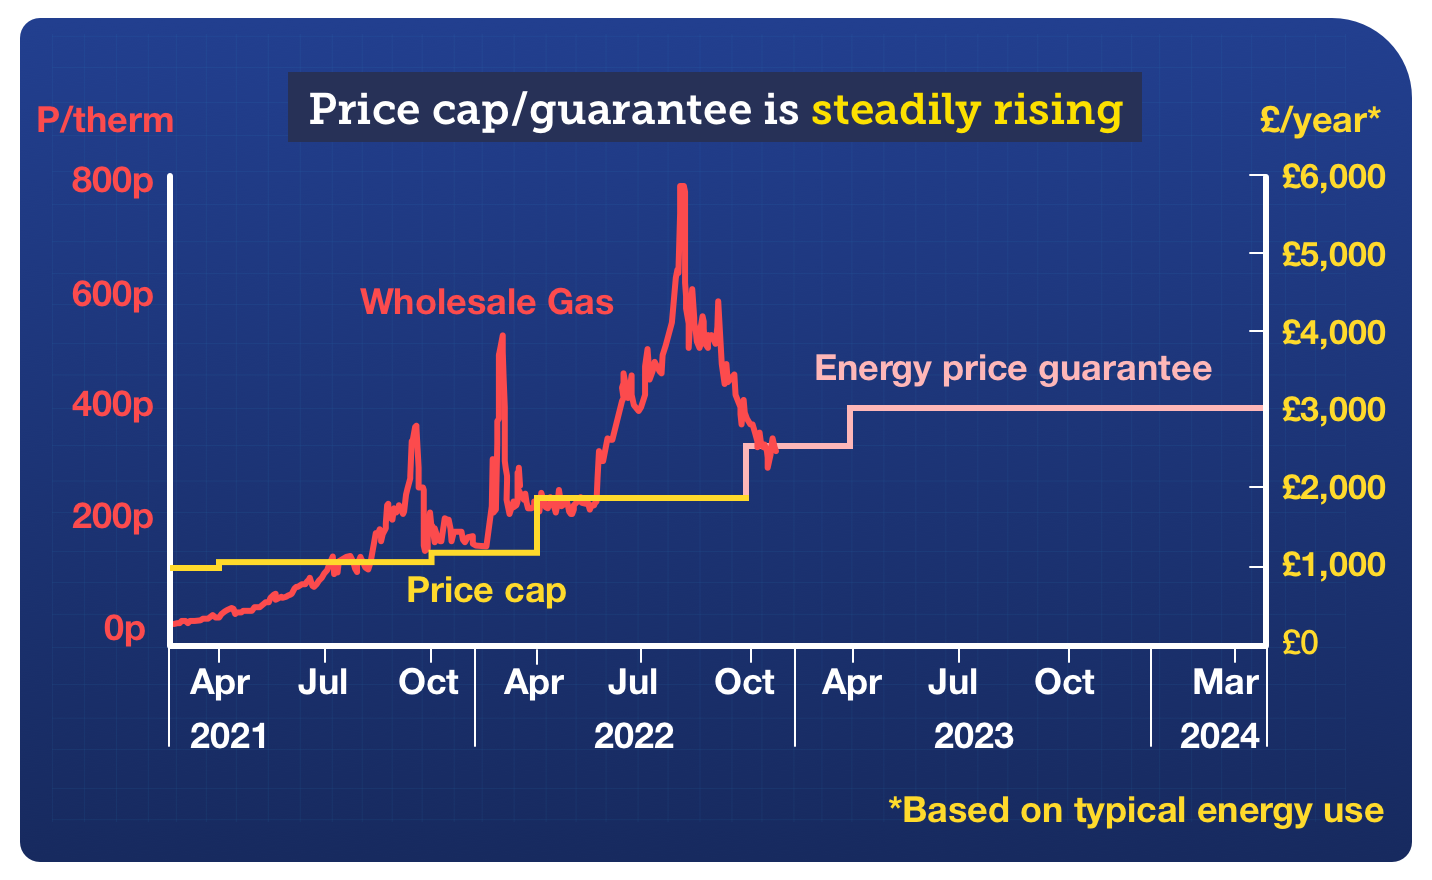 Graph shows how the energy price cap/guarantee has risen since April 2021 compared with the cost of wholesale gas. While wholesale gas prices have been more volatile and spiked several times in this period, the price cap/guarantee has risen more steadily, from £1,138 in April 2021 to £2,500 as the price guarantee now. Graph links to our news story on the energy price guarantee being scaled back from next spring.